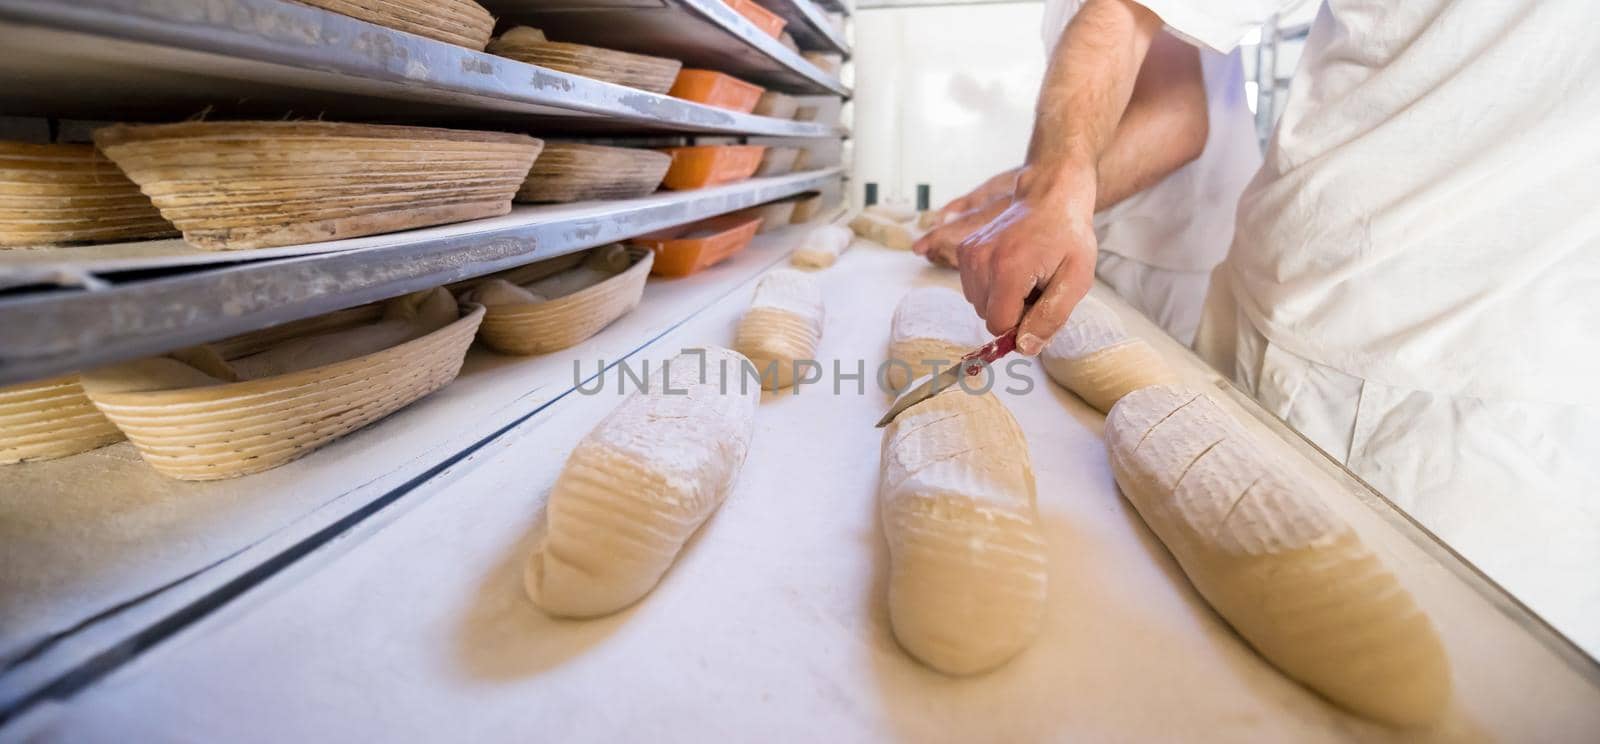 bakers preparing the dough for products In a traditional bakery